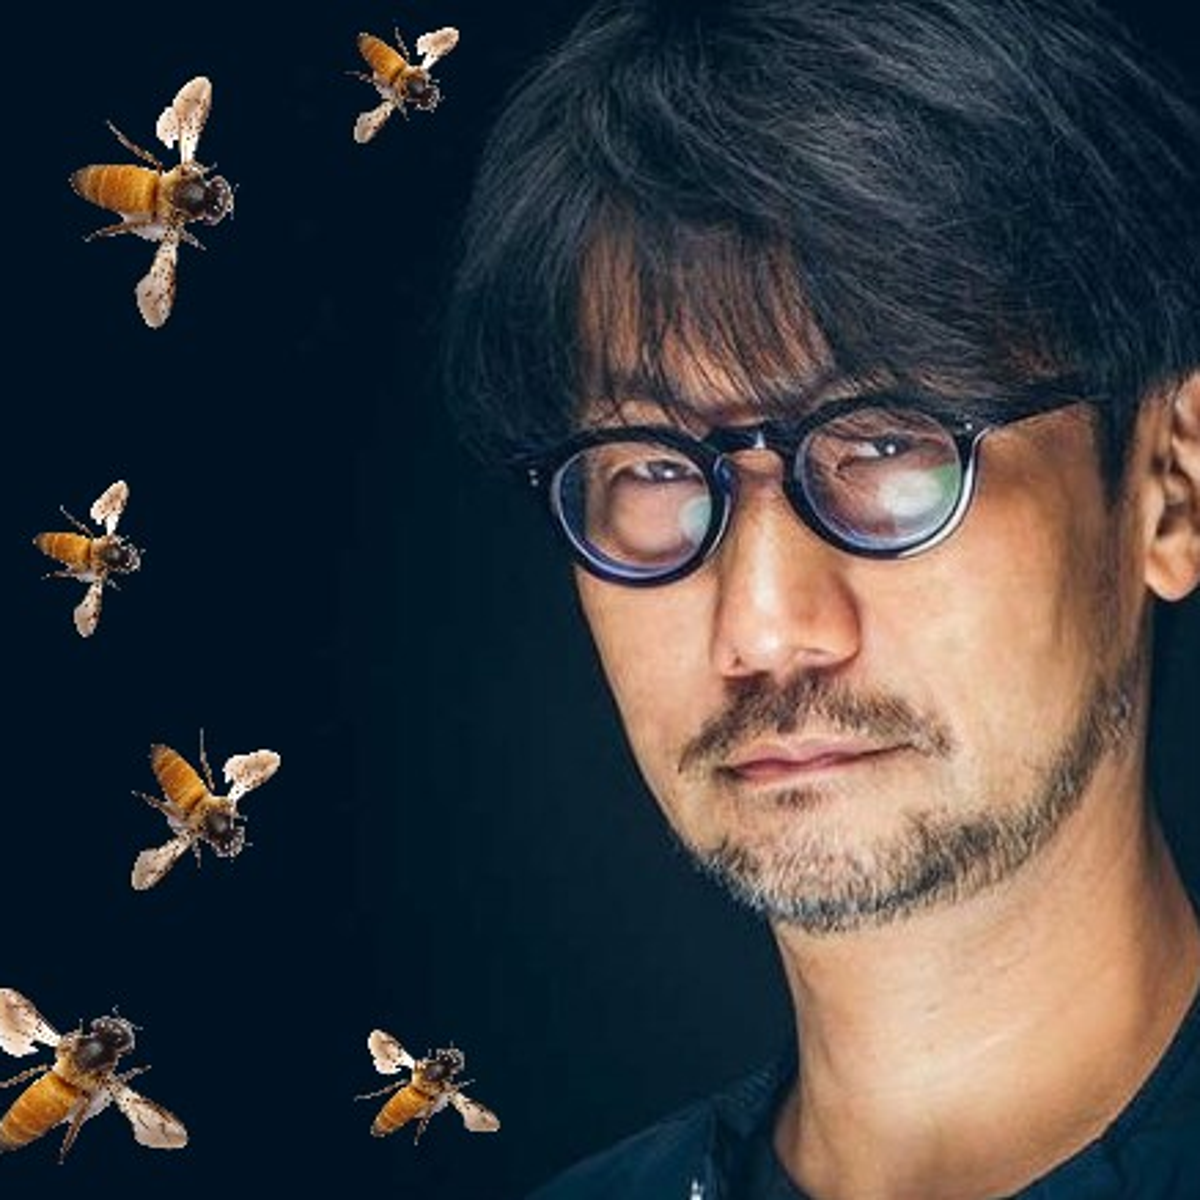 Hideo Kojima was stung by at least 10 bees all at once before